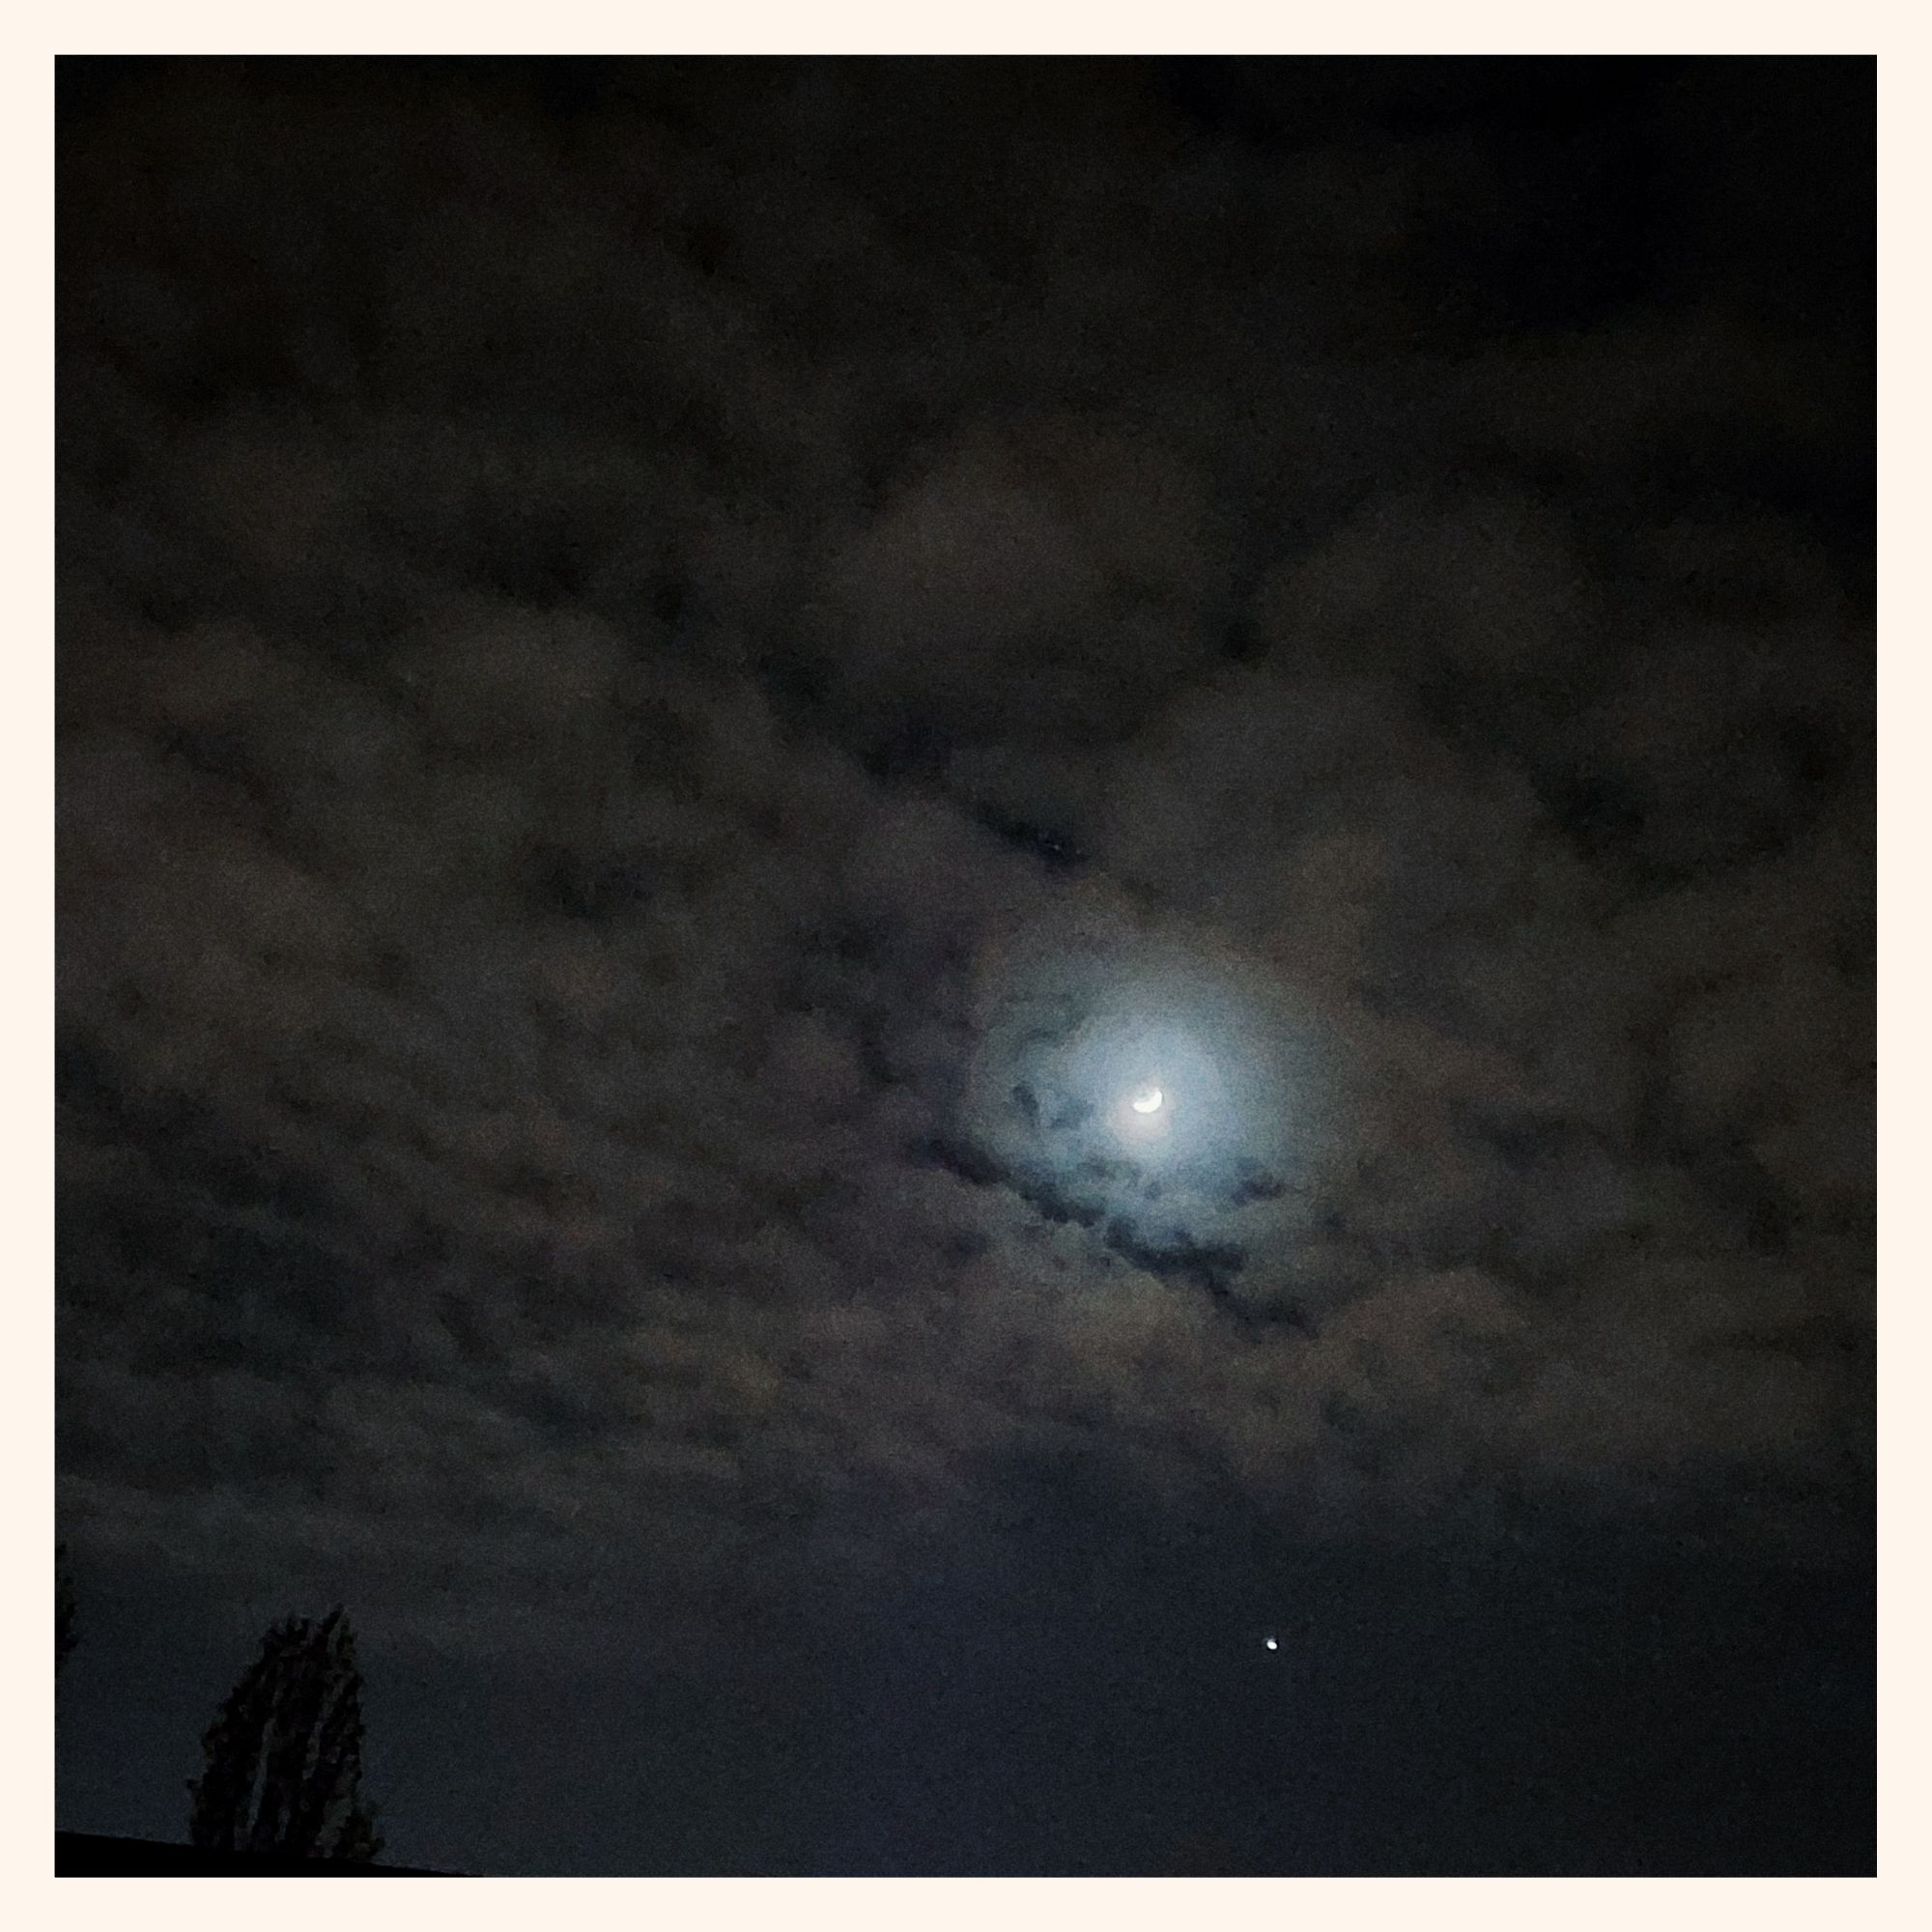 Moon and jupiter in a cloudy nightsky. Noisy, grainy shot with a bit of light in it.